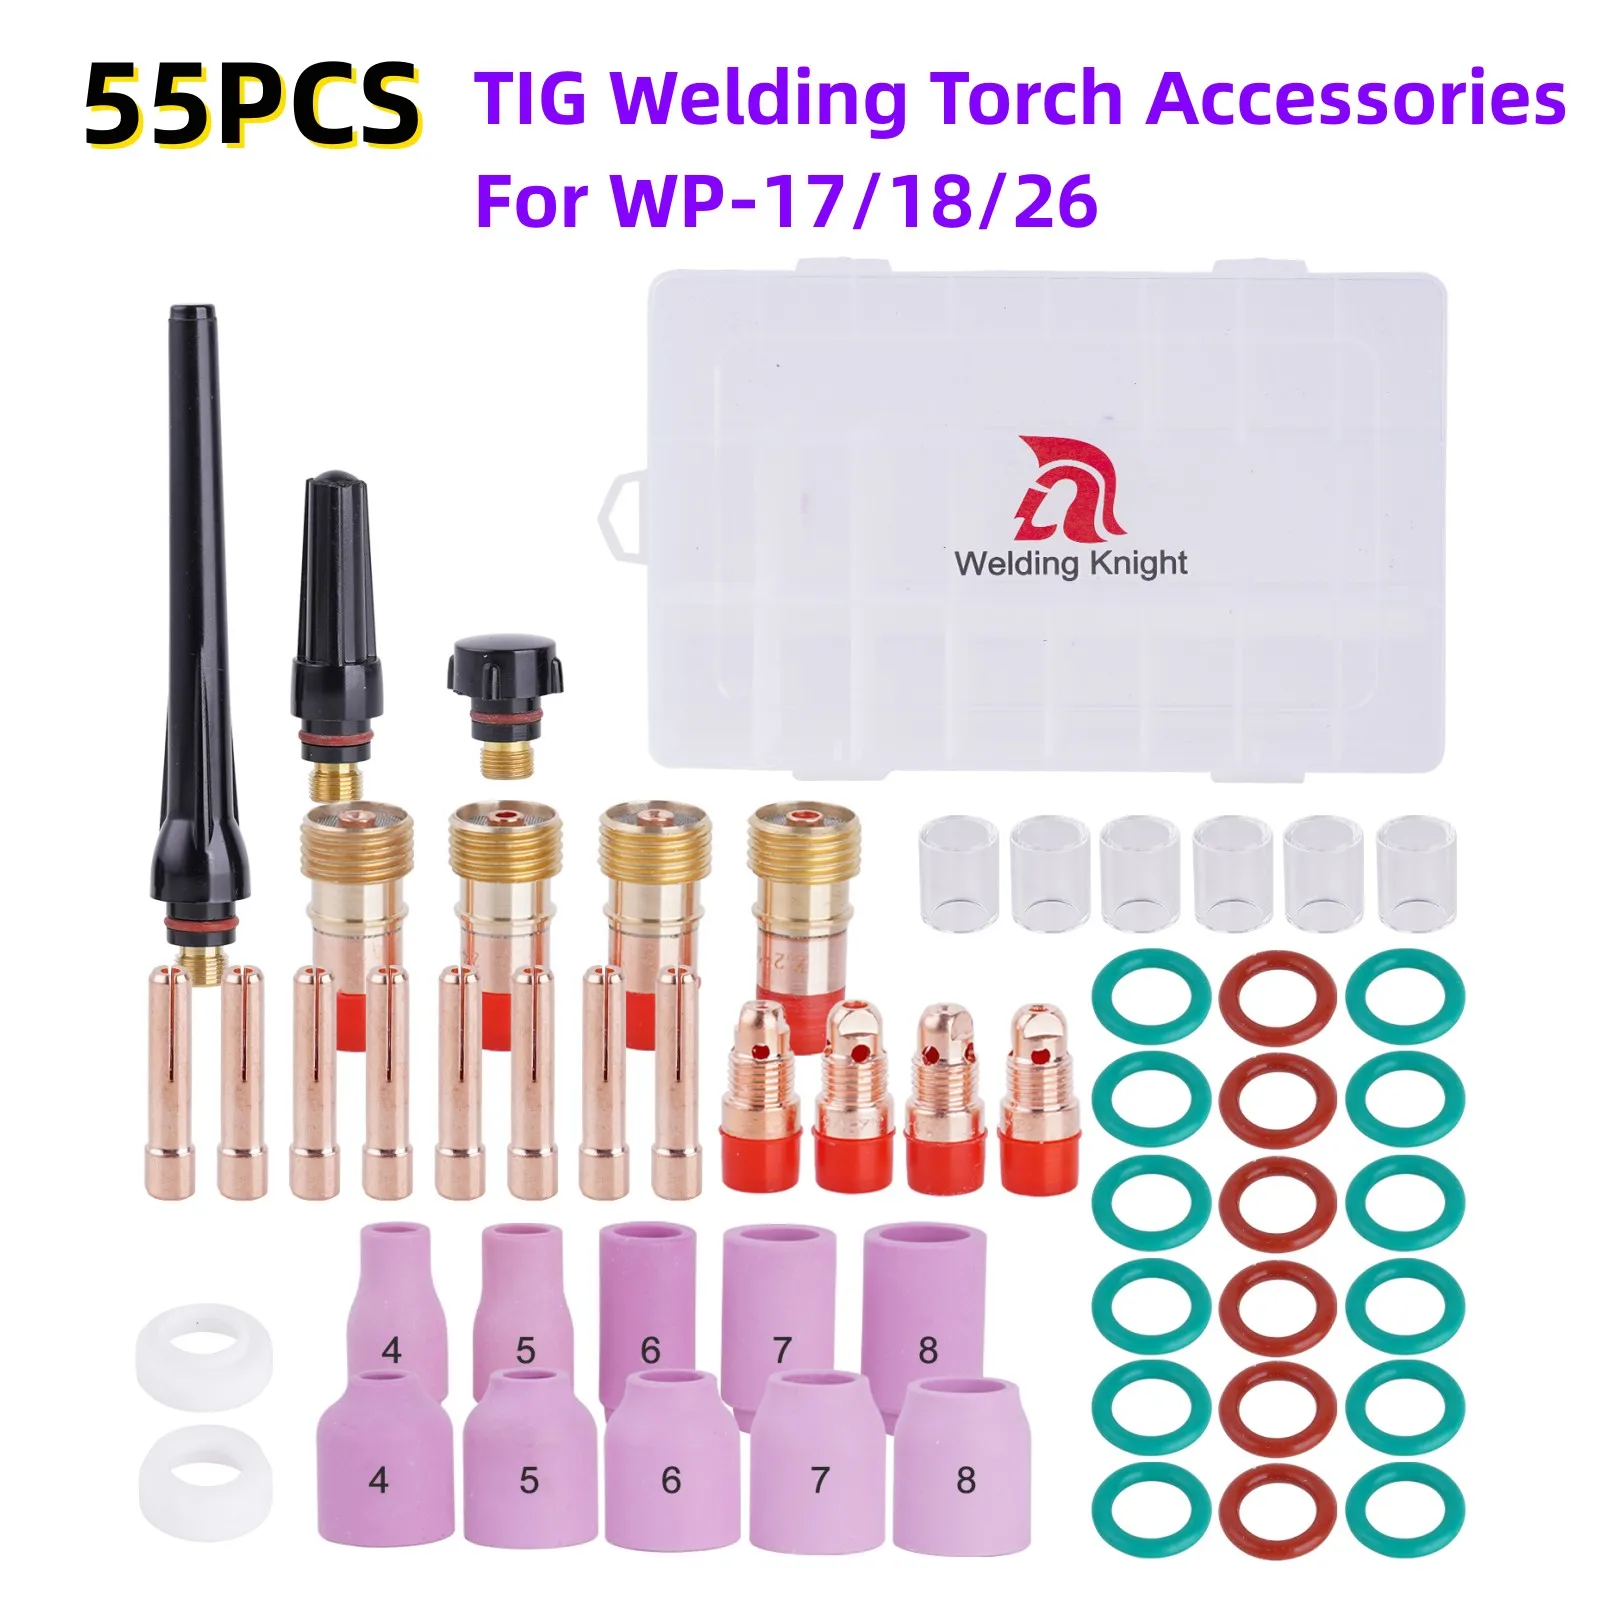 

55Pcs TIG Welding Torch Stubby Gas Lens #10 Pyrex Glass Cup Accessories Kit For TIG WP-17/18/26 Practical Accessories